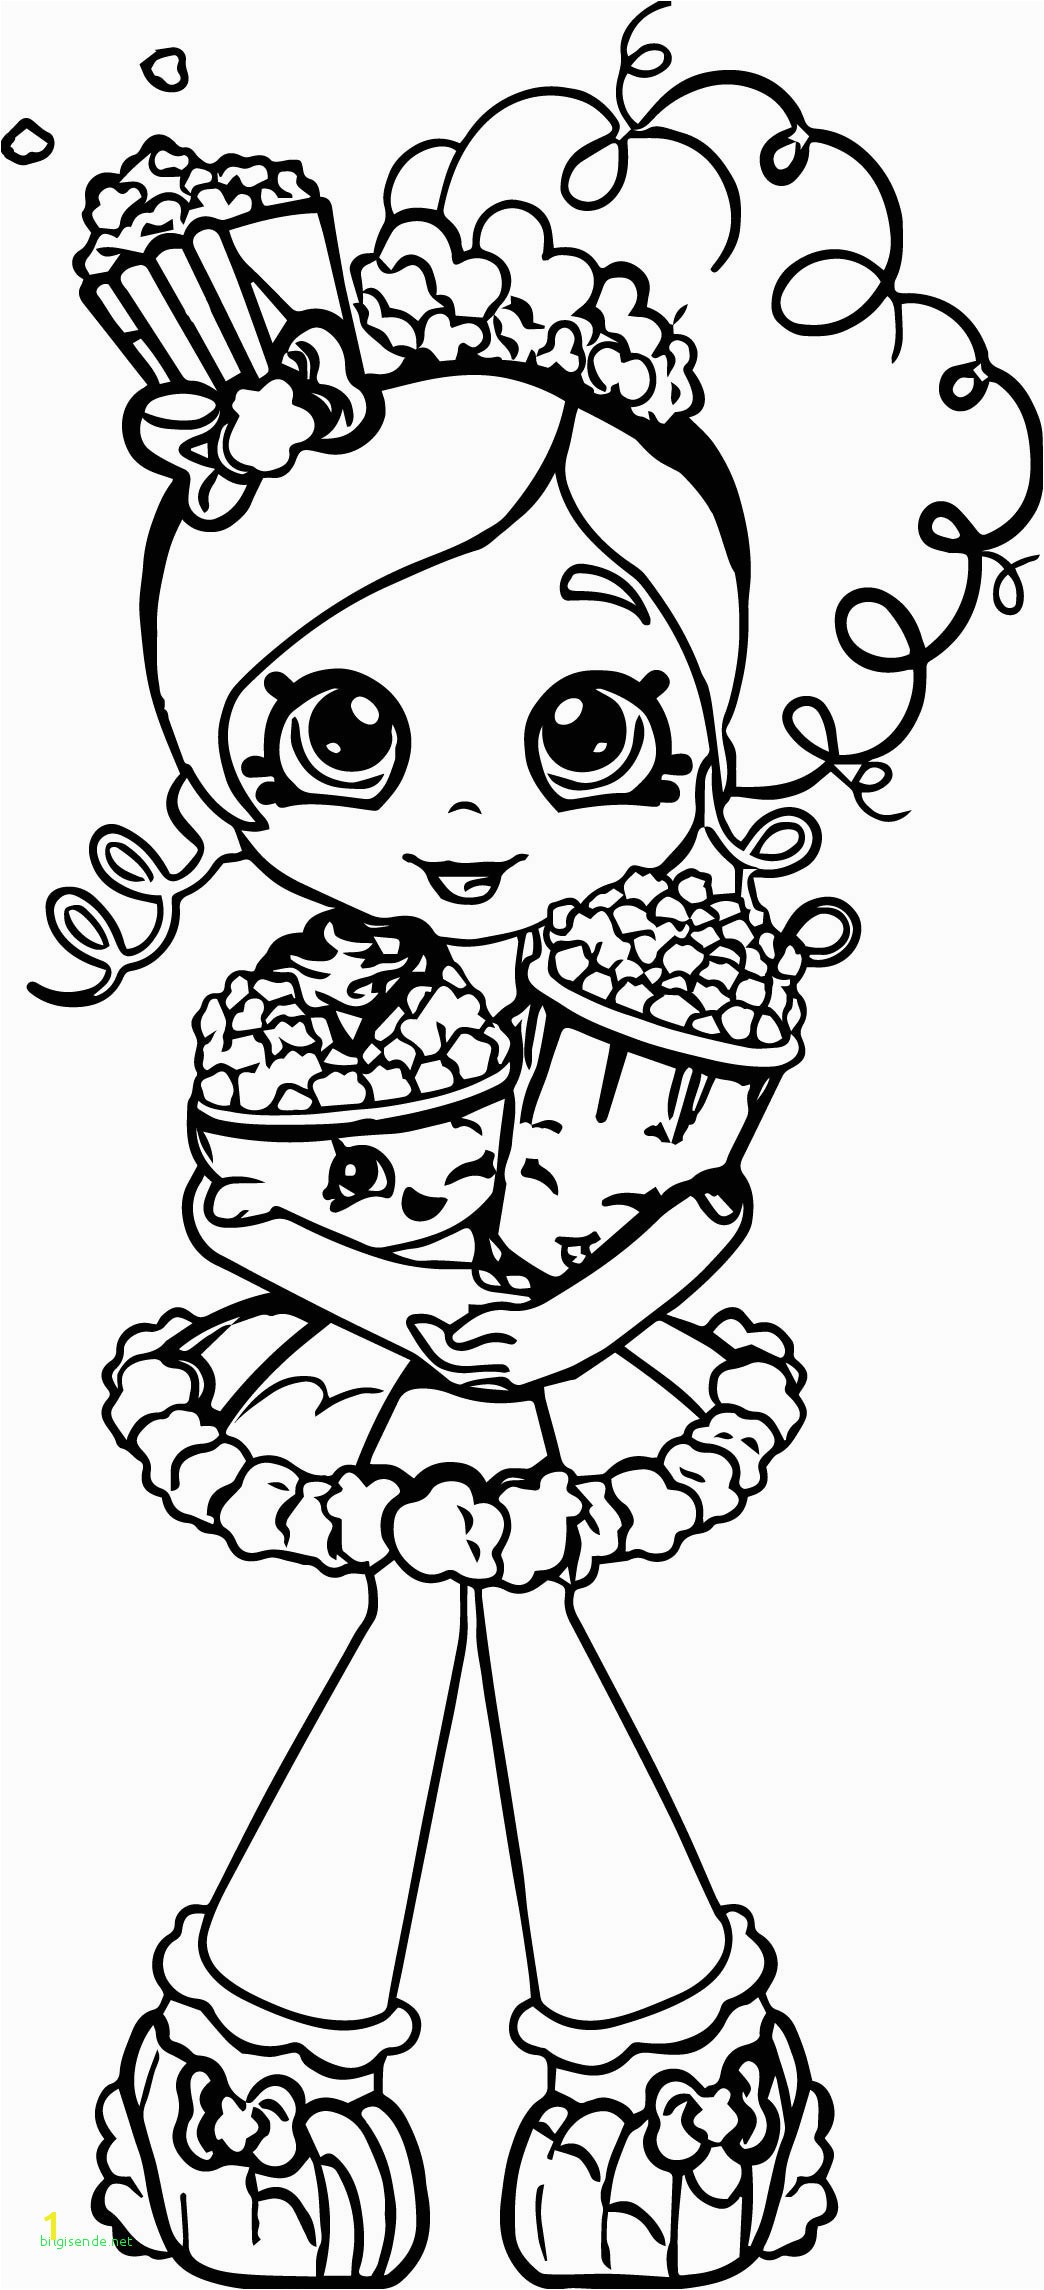 Shopkins Poppy Corn Coloring Page Luxury Coloring Pages for Girls Shopkins Printables Alphabet